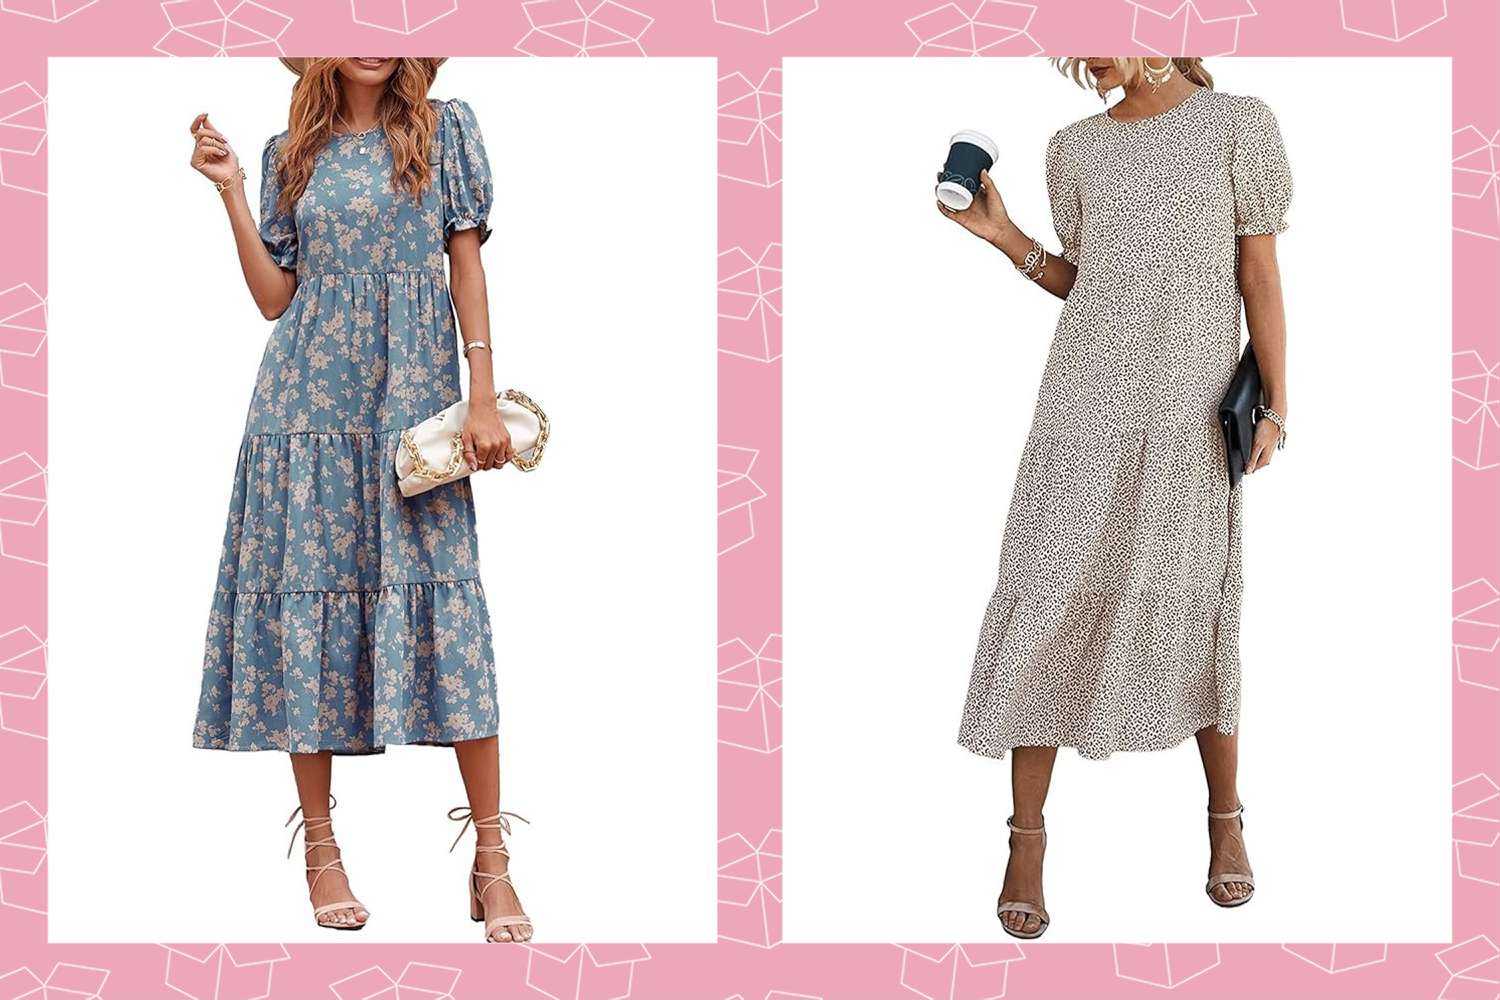 Two Prettygarden Puff-Sleeve Midi Dresses in different patterns on models with a pink border